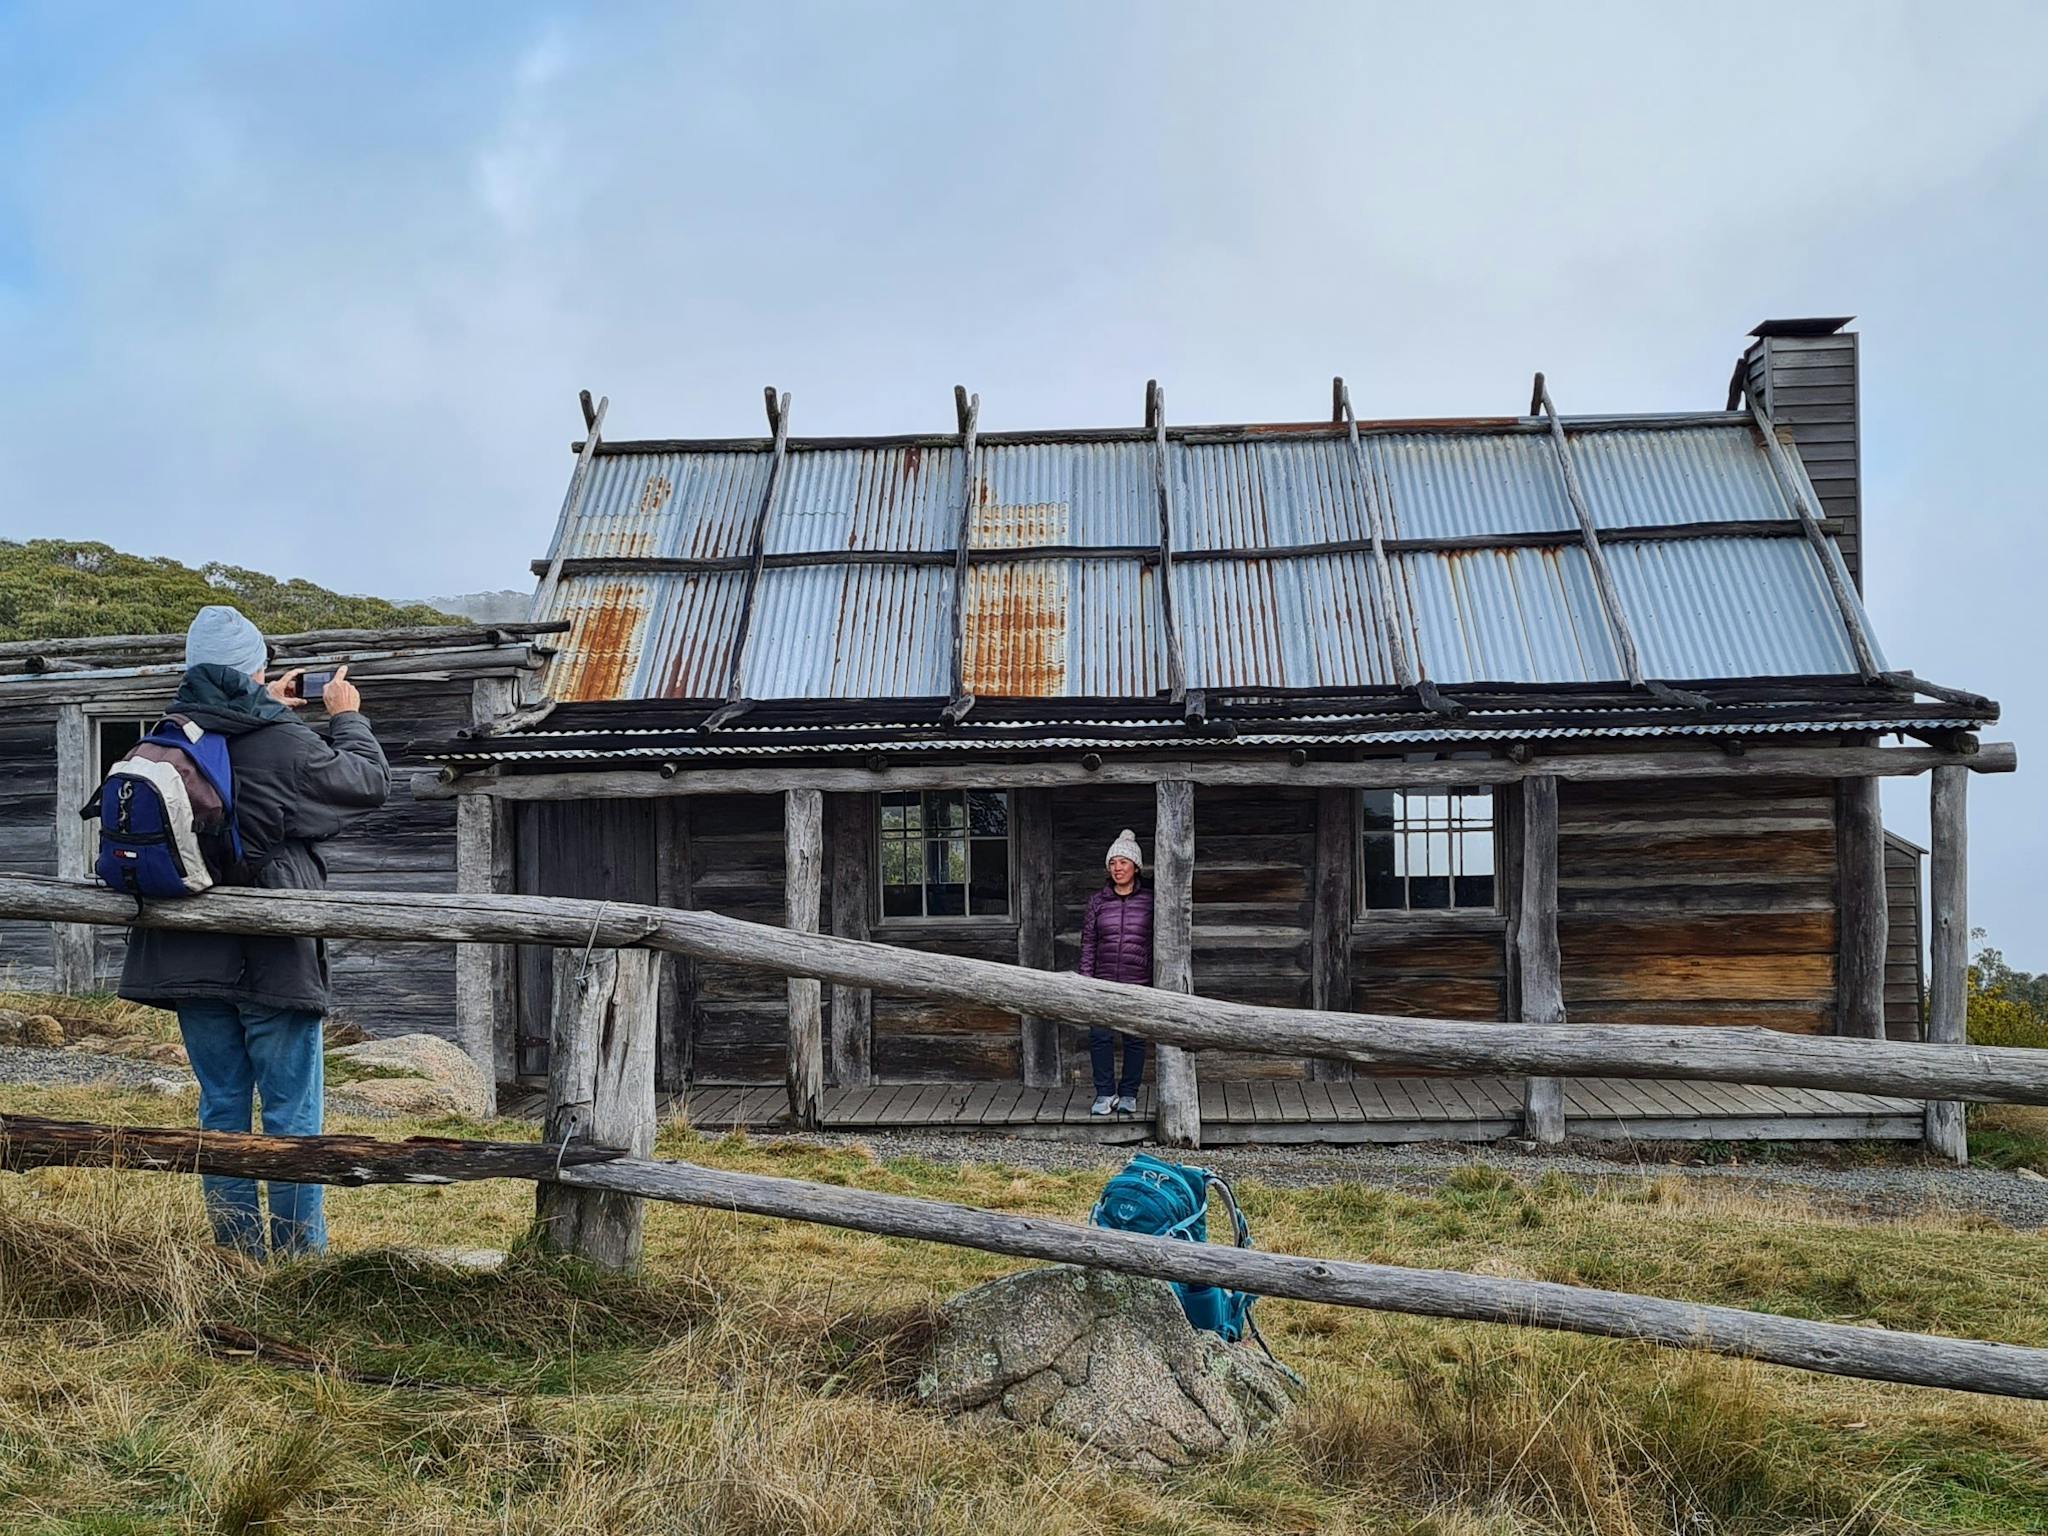 A couple of hikers capturing the magic of Craig's Hut on their camera.